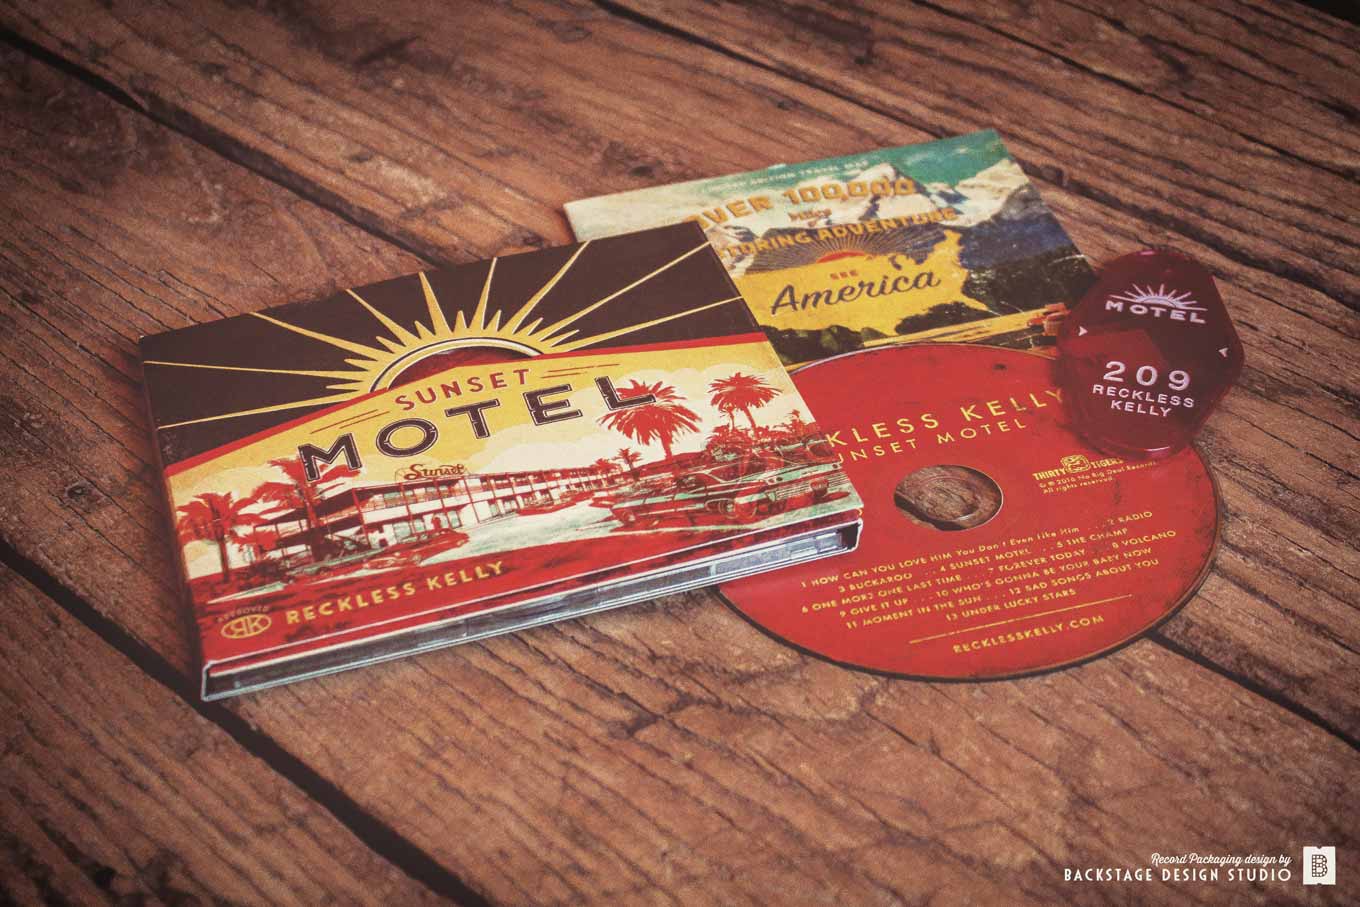 Reckless Kelly Sunset Motel CD package